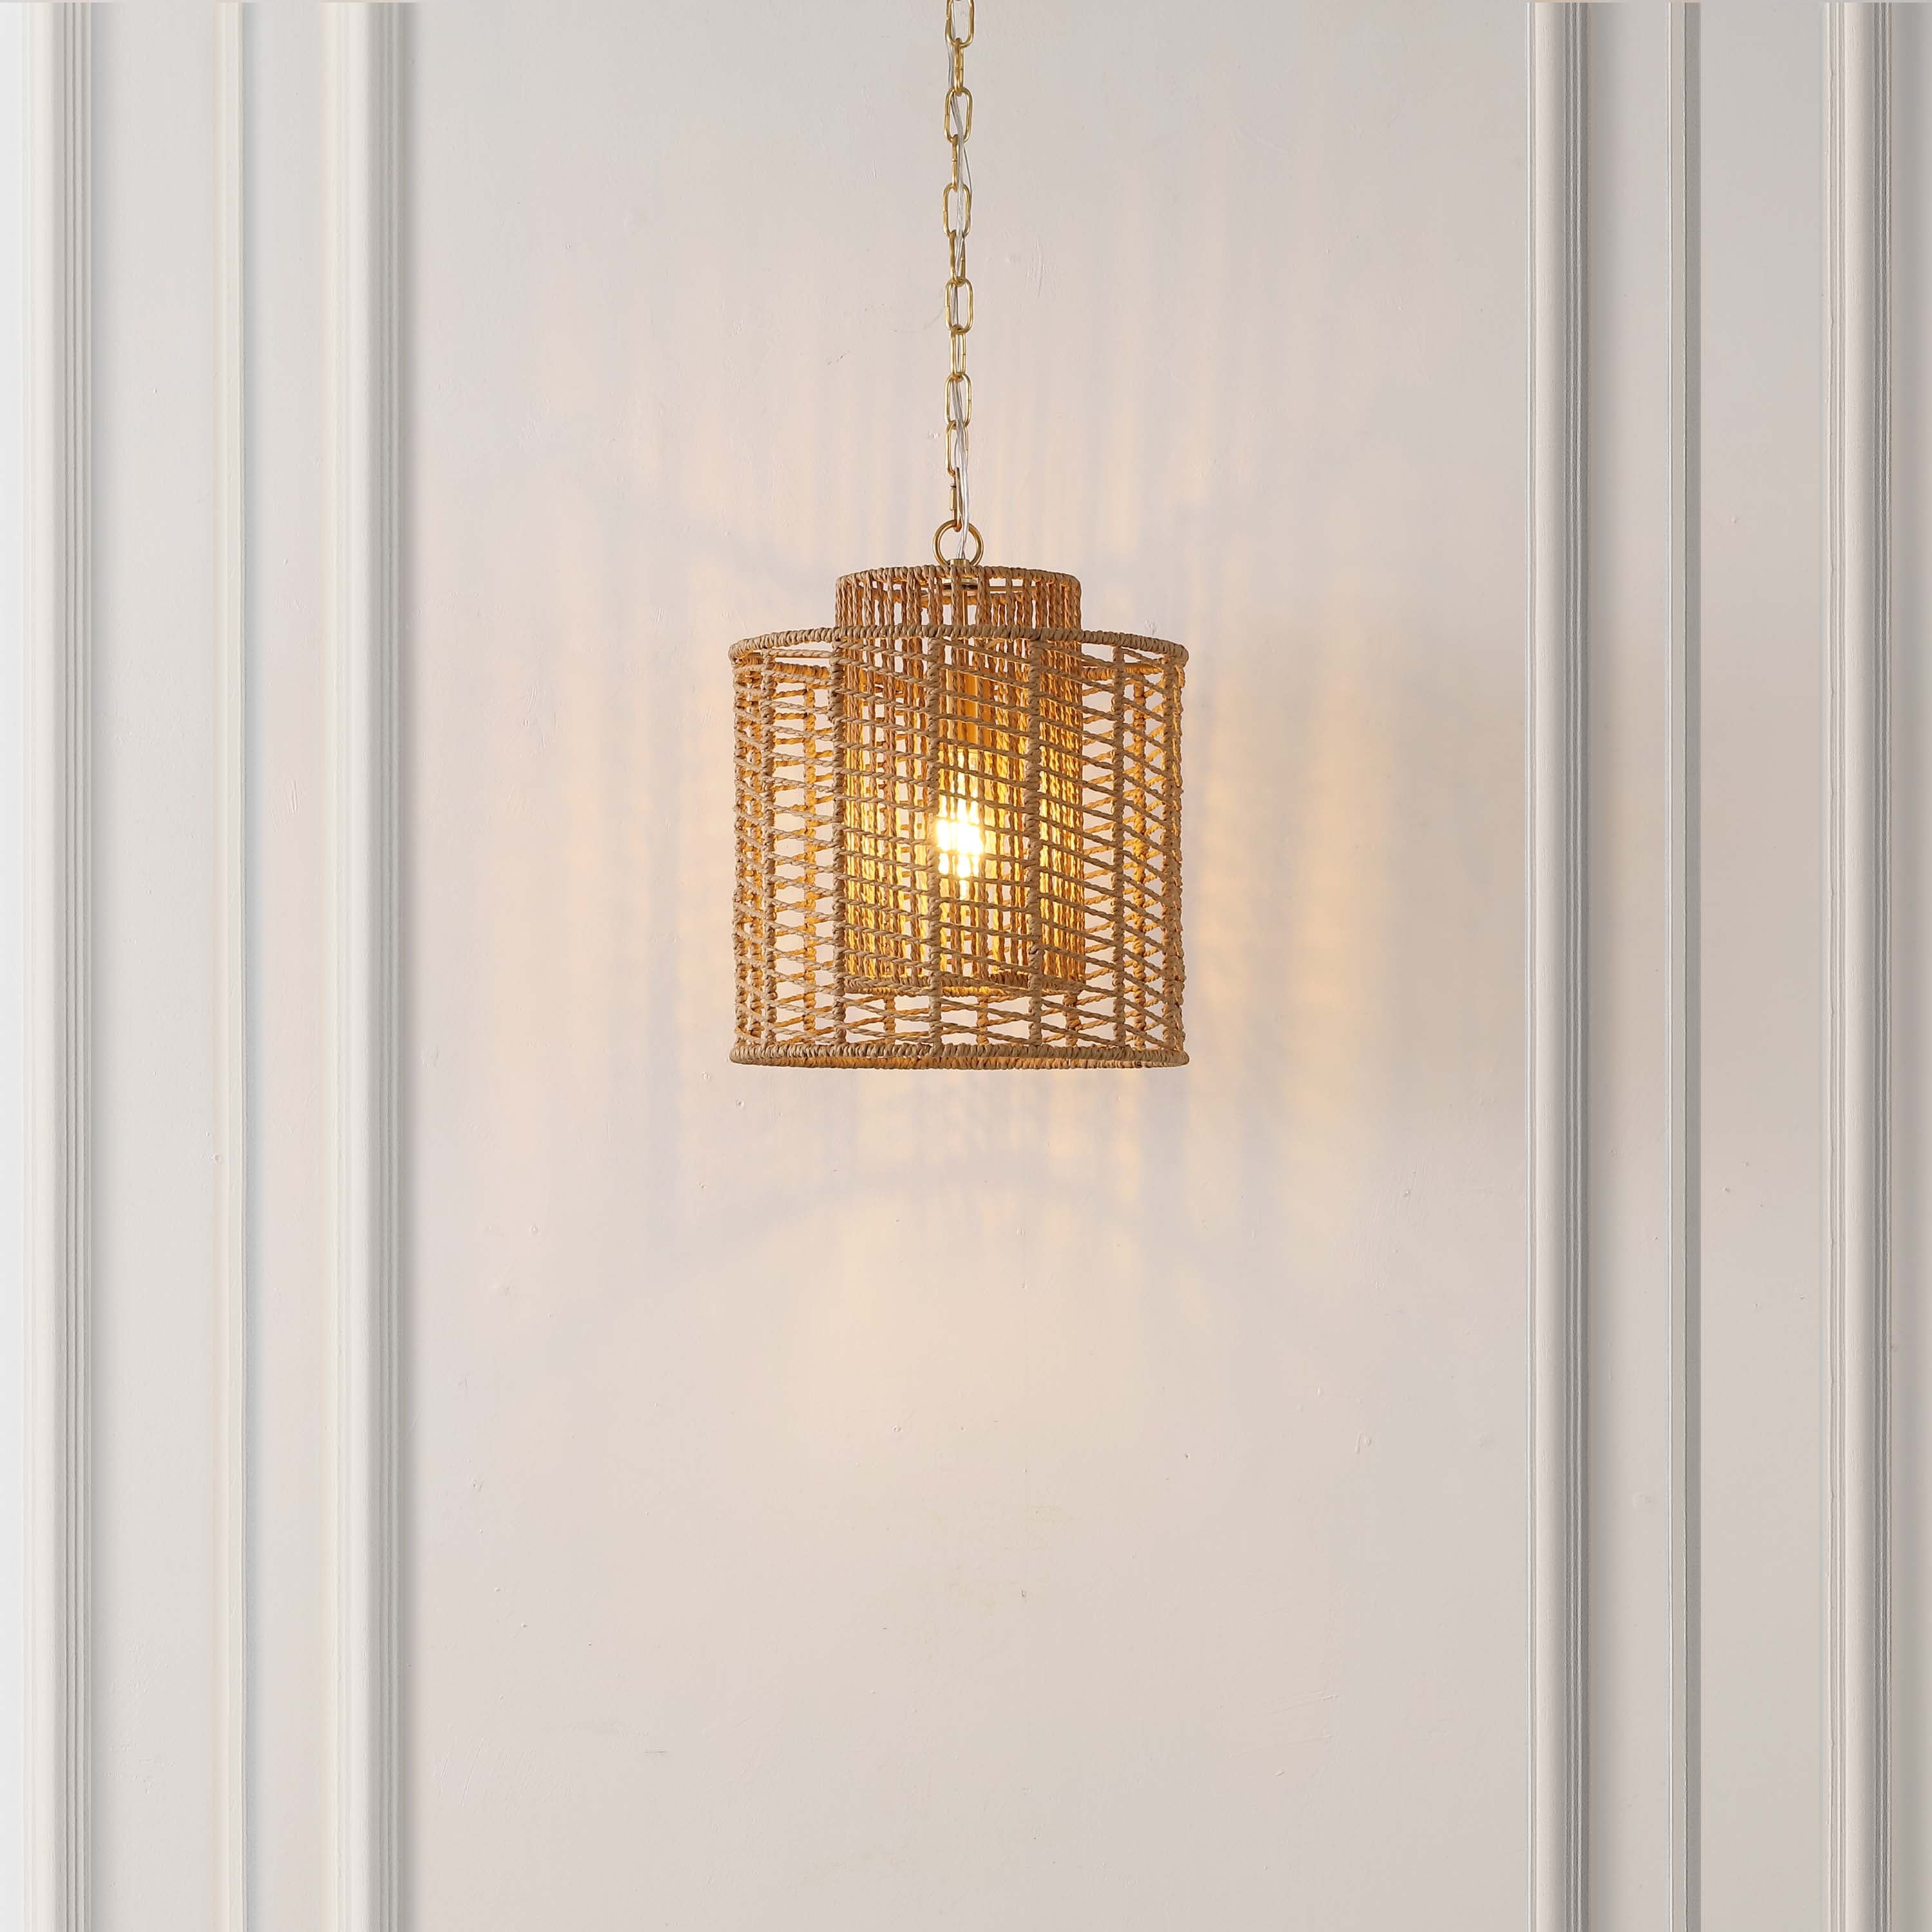 Safavieh Ryoa 12.25 Inch Extendable Pendant , PND4191 - Natural / Gold